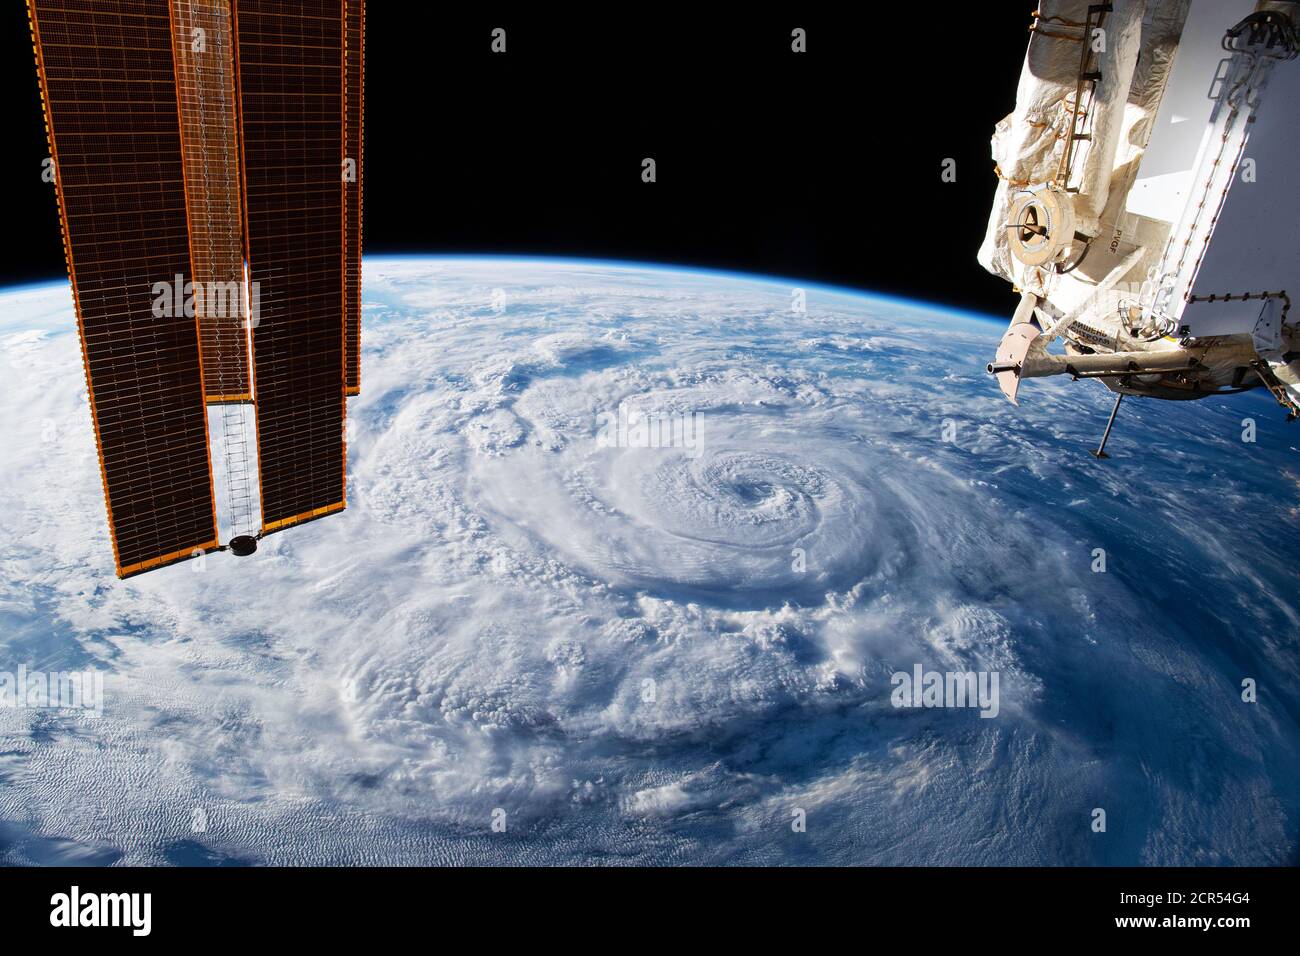 Hurricane Genevieve, off the Pacific coast of Mexico, Aug. 19, 2020, as seen from space Stock Photo